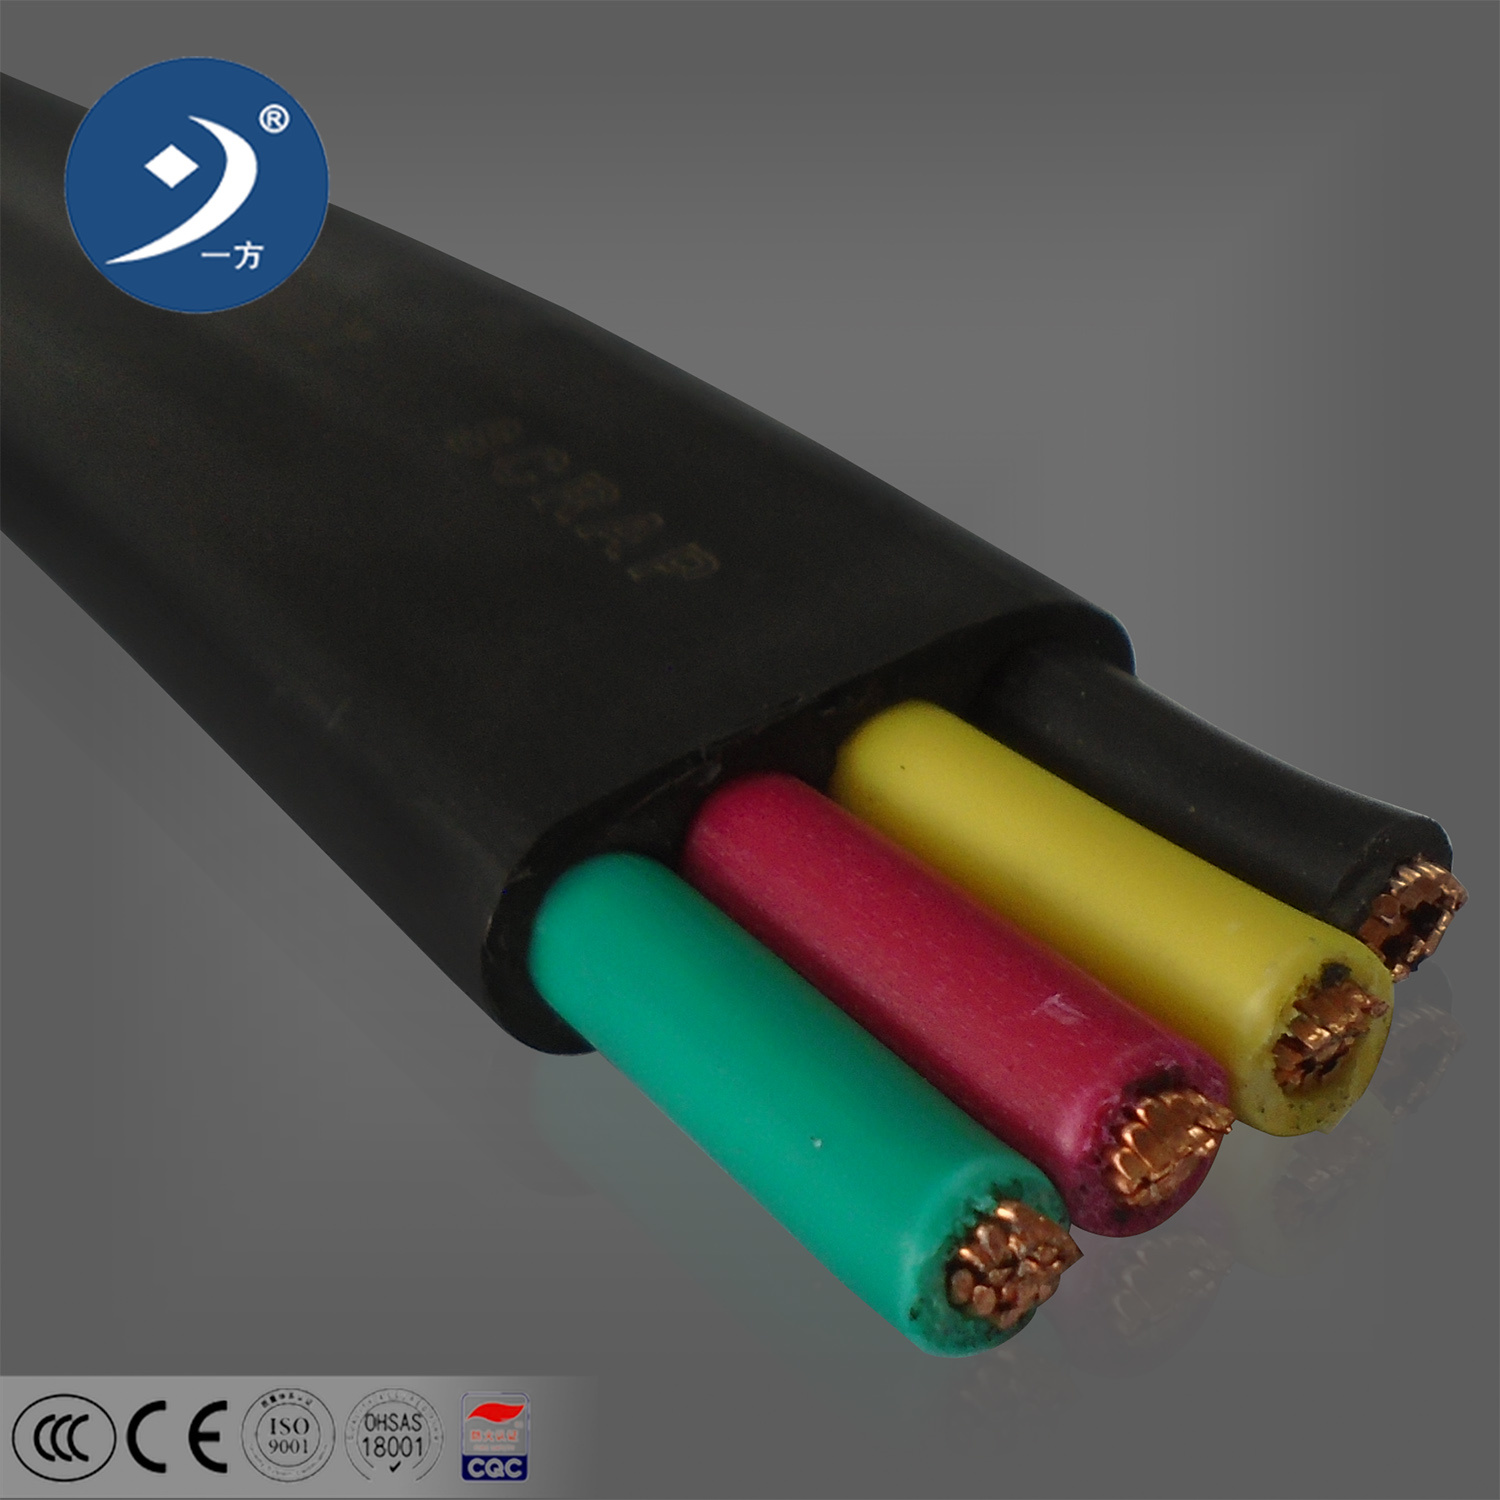 4 Sq 2.5 Sq mm Submersible Cable Flat Flexible Flat Electrical Wire Travelling Cable for Elevator Price